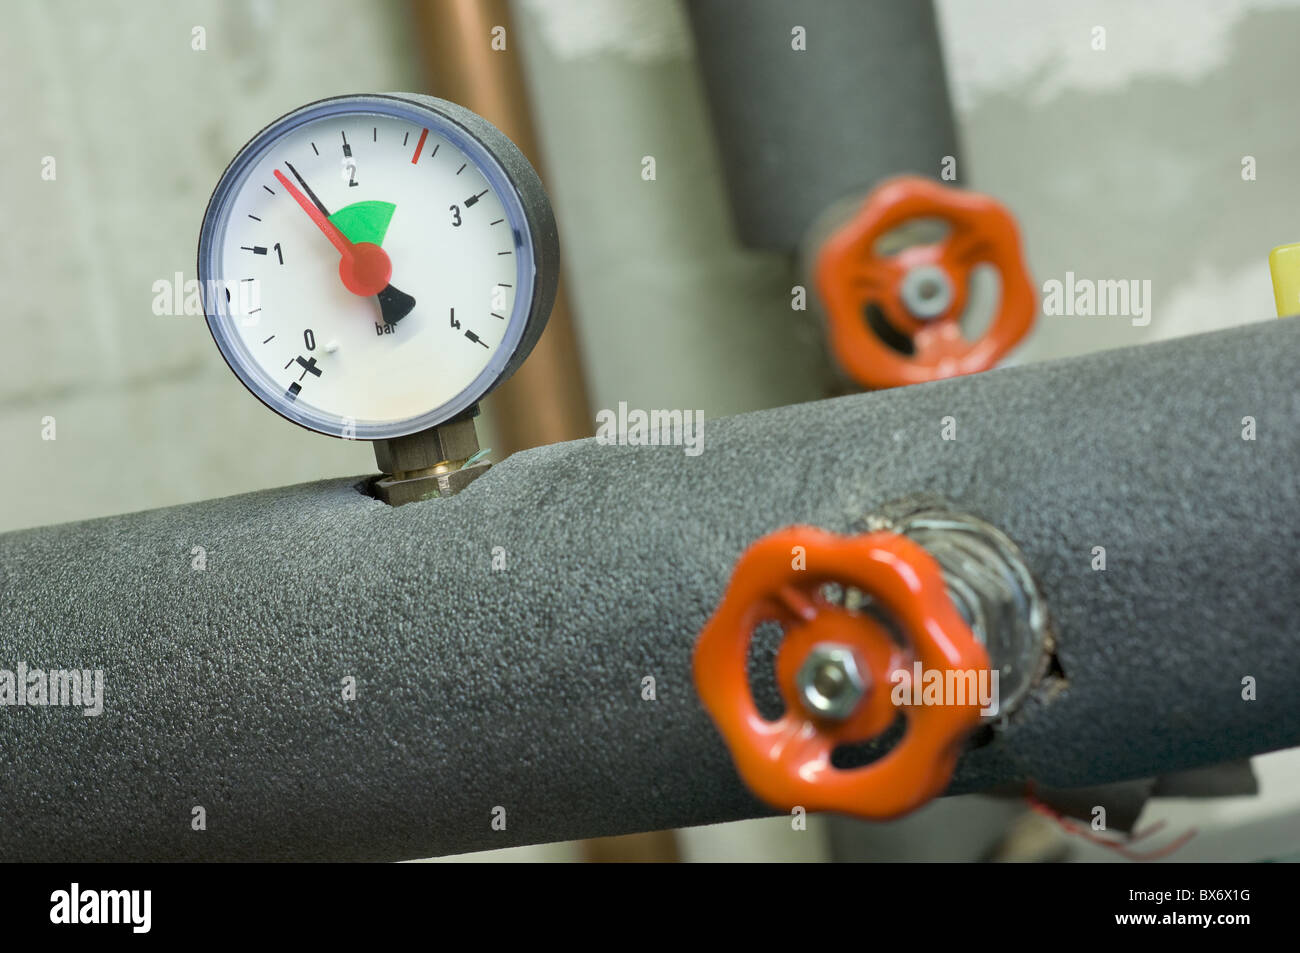 pressure of a gas tank Stock Photo